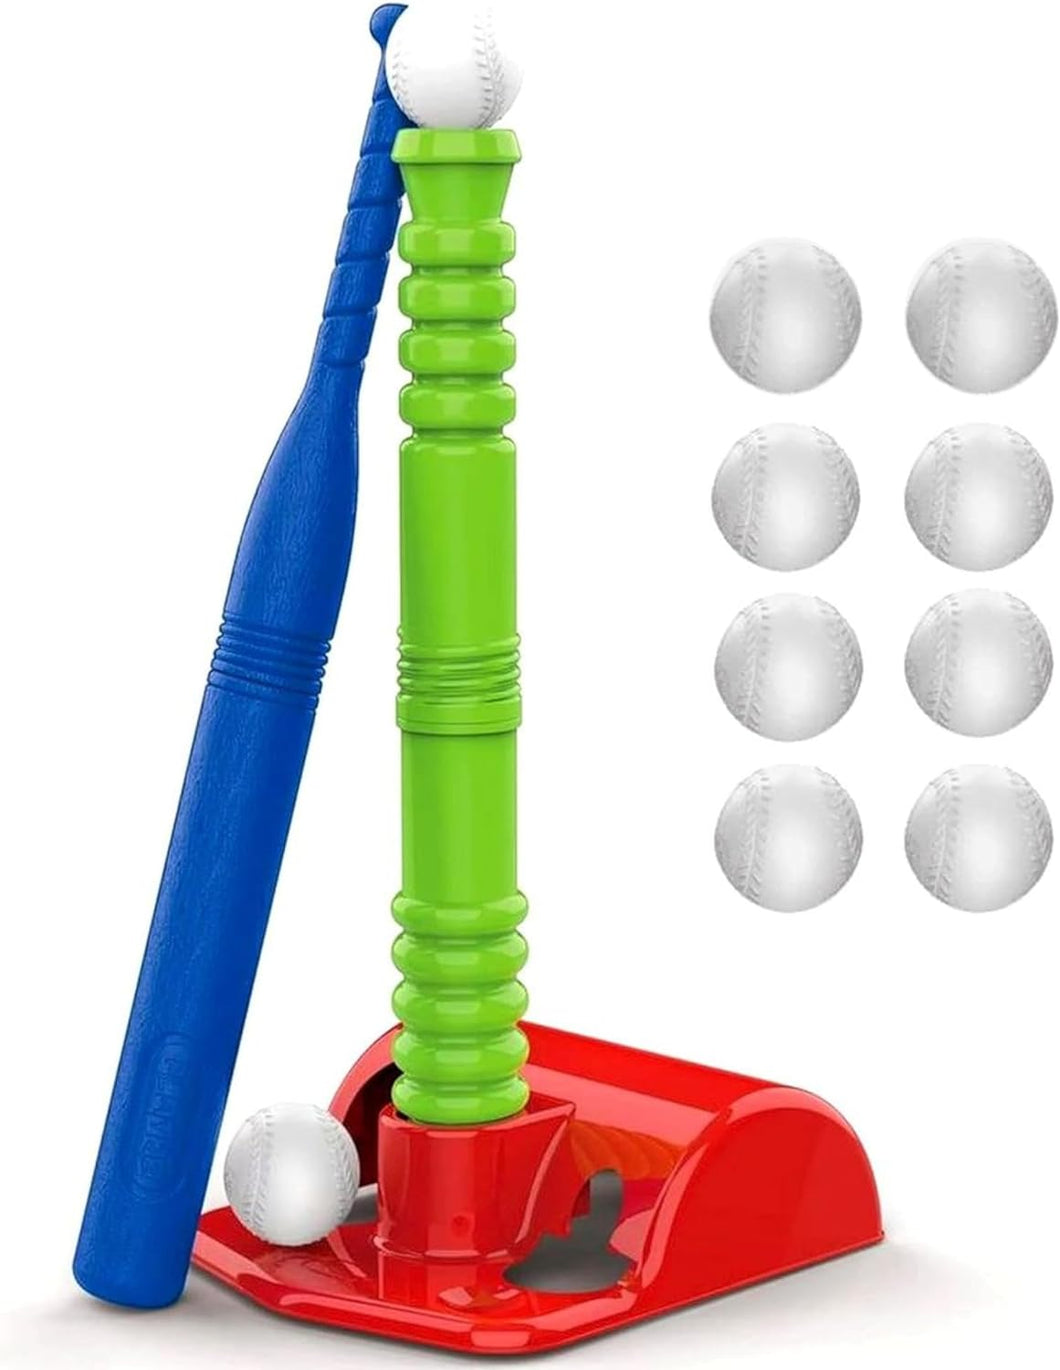 T Ball Set for Toddler with 8 Balls - T-Ball Set for Kids 3-5 with 20